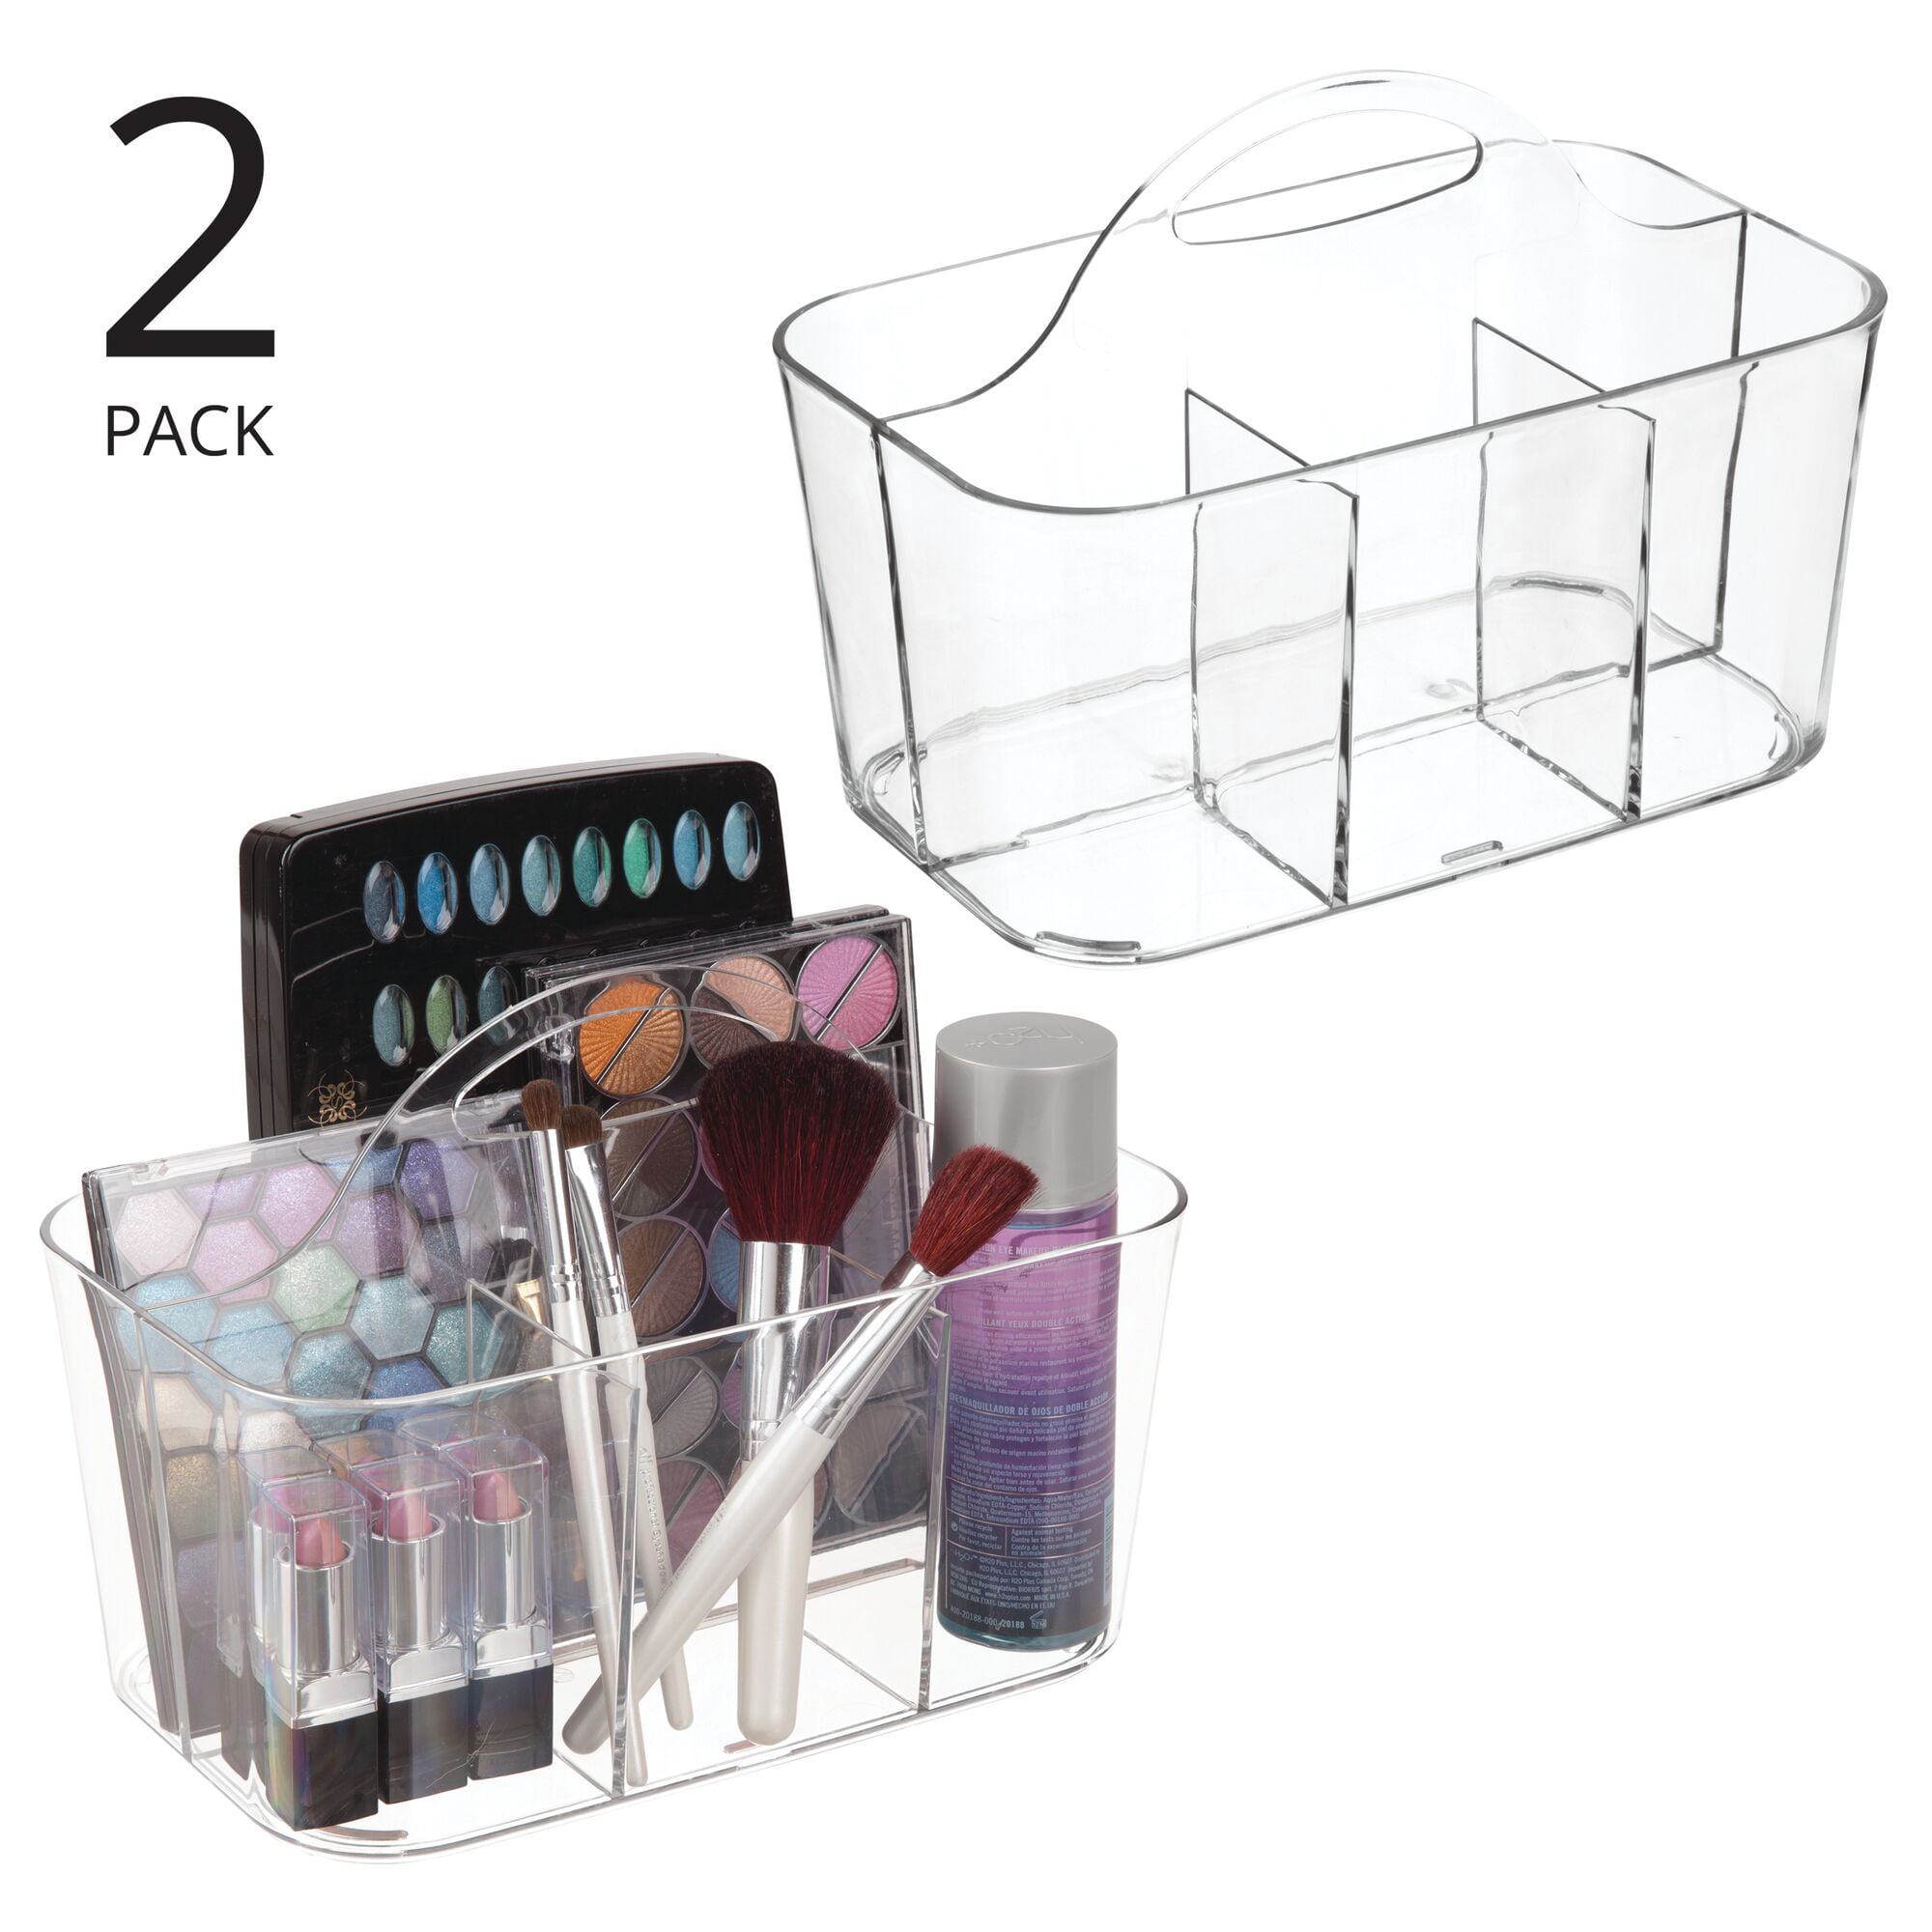 2 PACK - Portable DIY 8 Dividers Durable Plastic Organizer Tote Tool,  Supply, Vanity Storage Home Office School Makeup Cleaning Caddy with Handle  Made